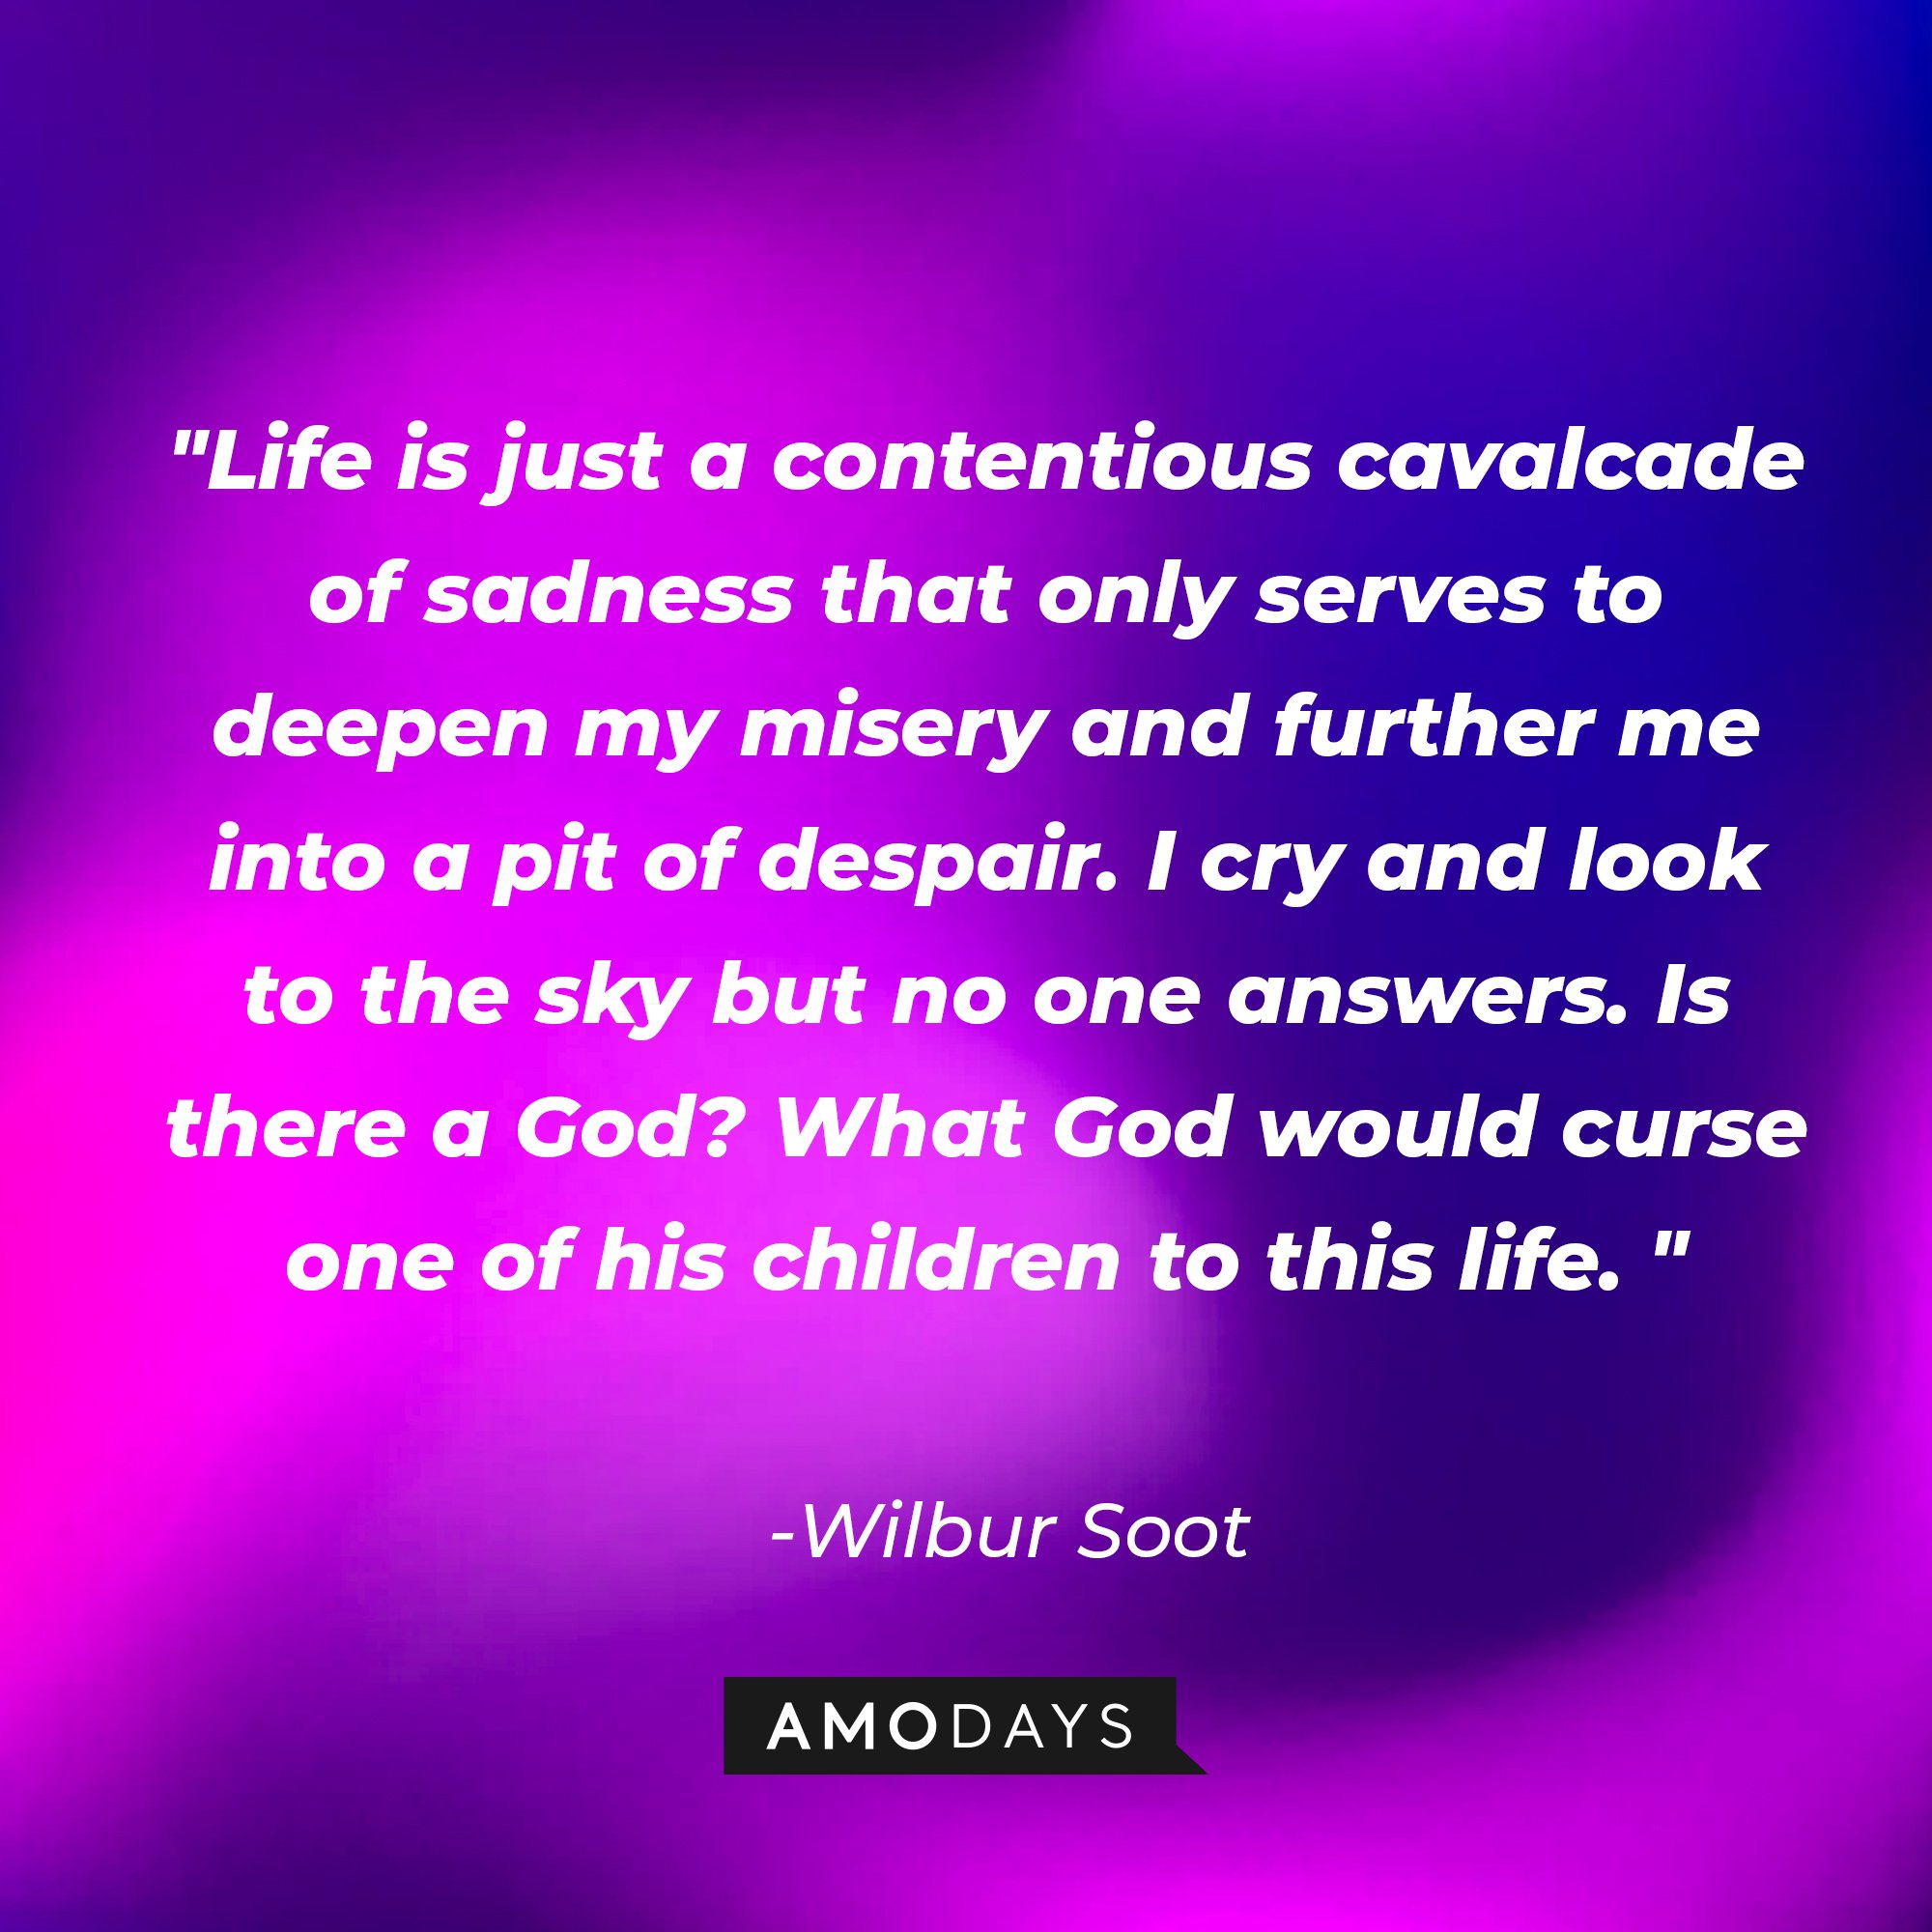 Wilbur Soot's quote: "Life is just a contentious cavalcade of sadness that only serves to deepen my misery and further me into a pit of despair. I cry and look to the sky but no one answers. Is there a God? What God would curse one of his children to this life." | Image: AmoDays